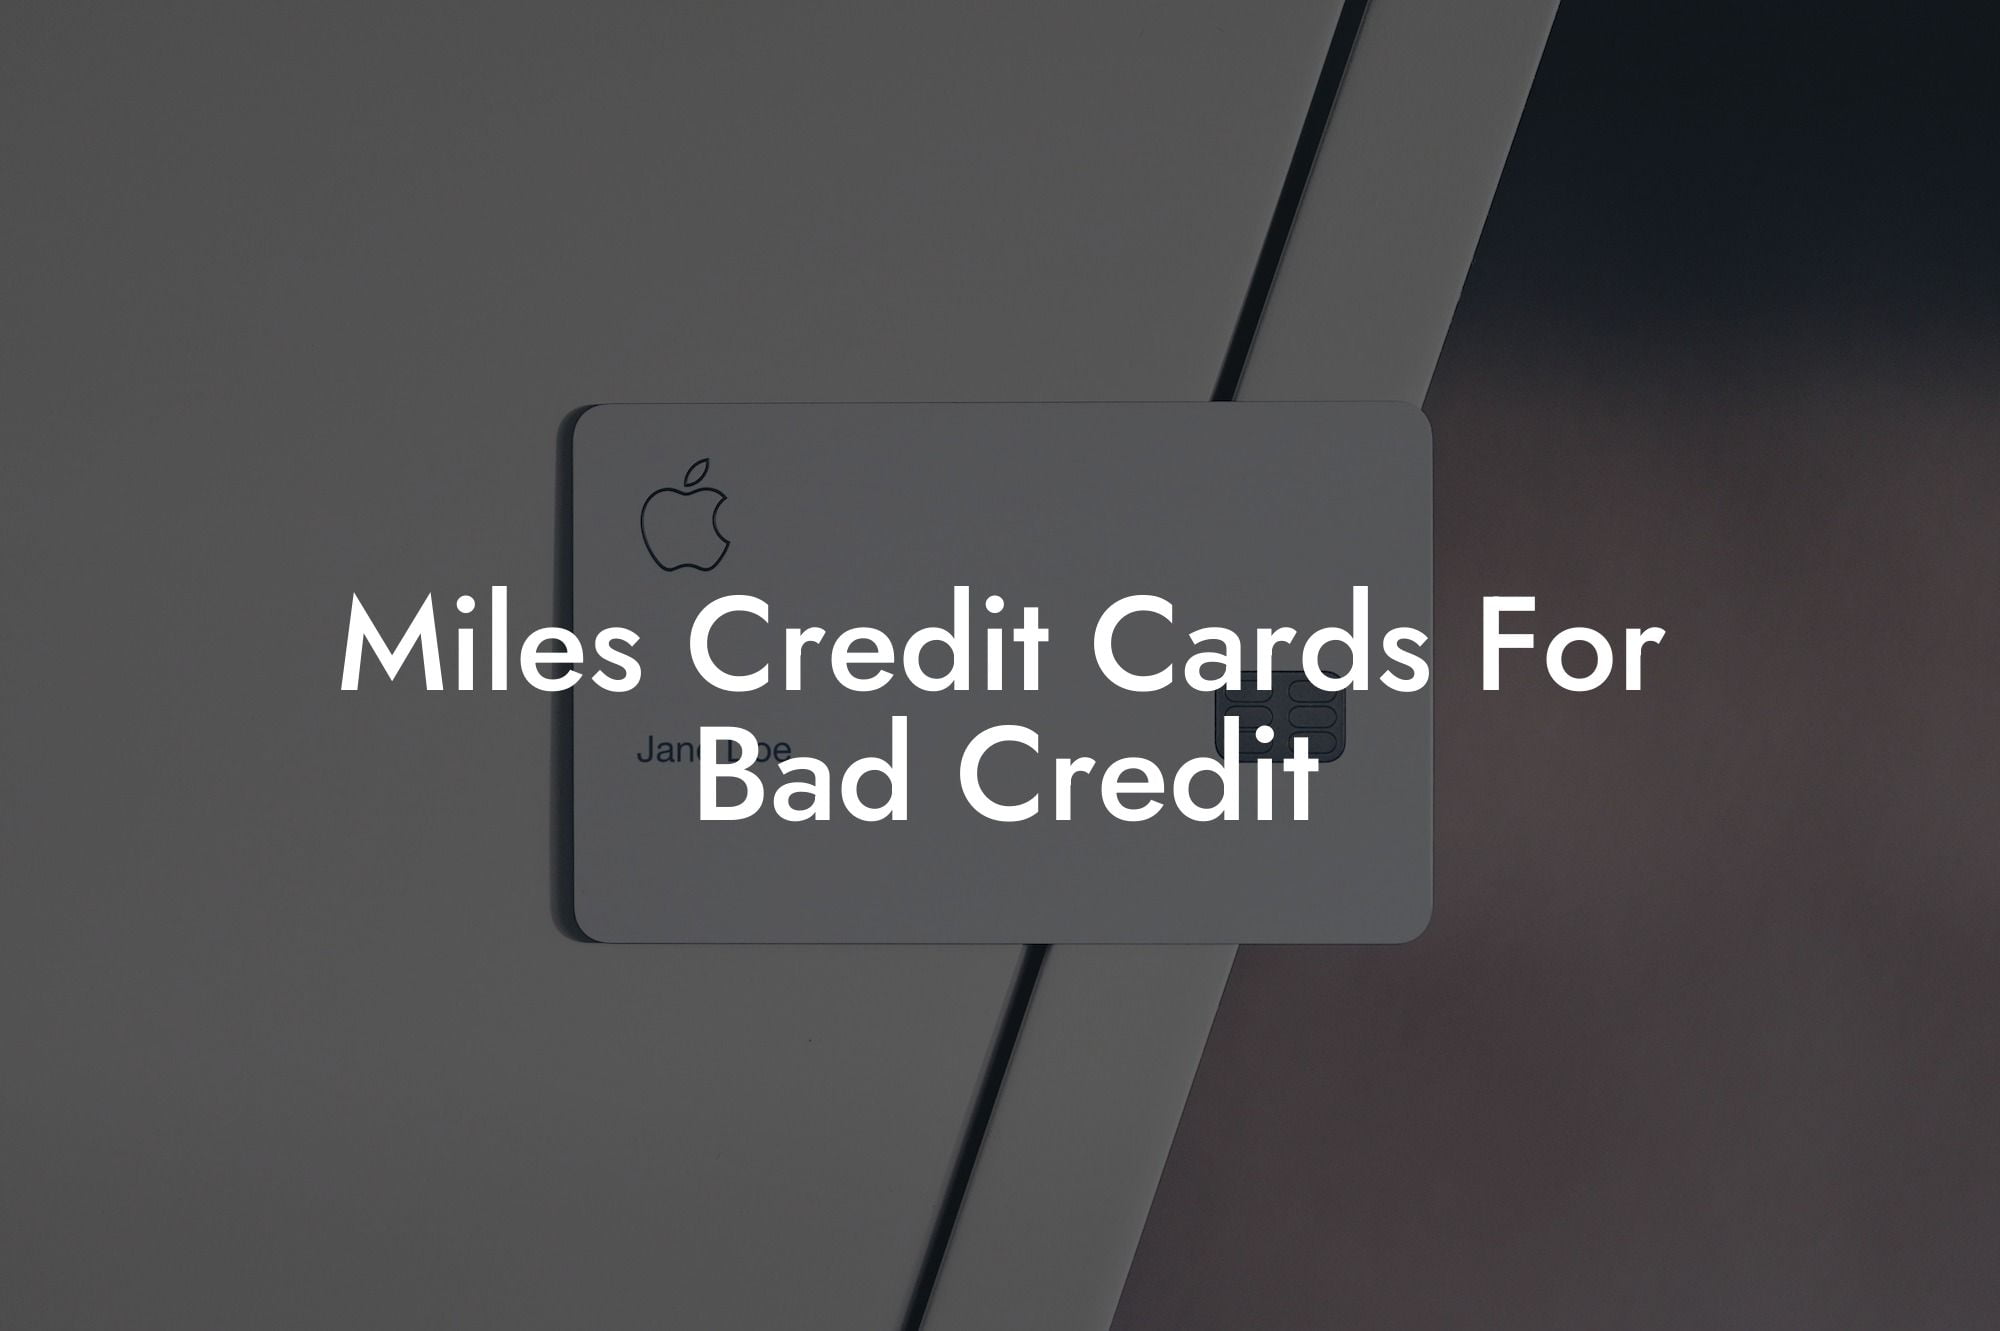 Miles Credit Cards For Bad Credit